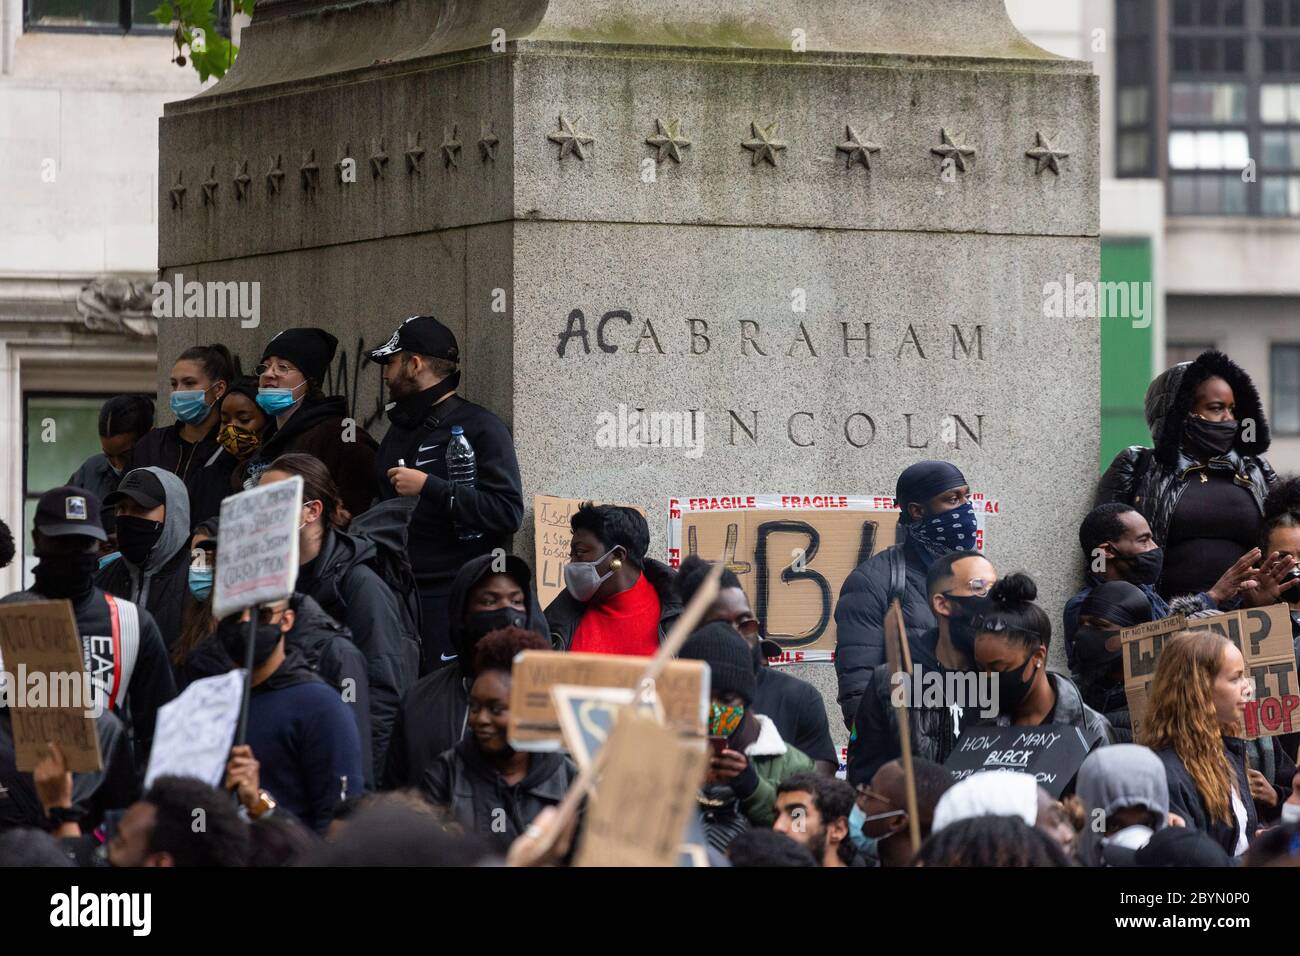 Graffiti on the plinth of the statue of Abraham Lincoln in Parliament Square during a Black Lives Matters protest, London, 7 June 2020 Stock Photo